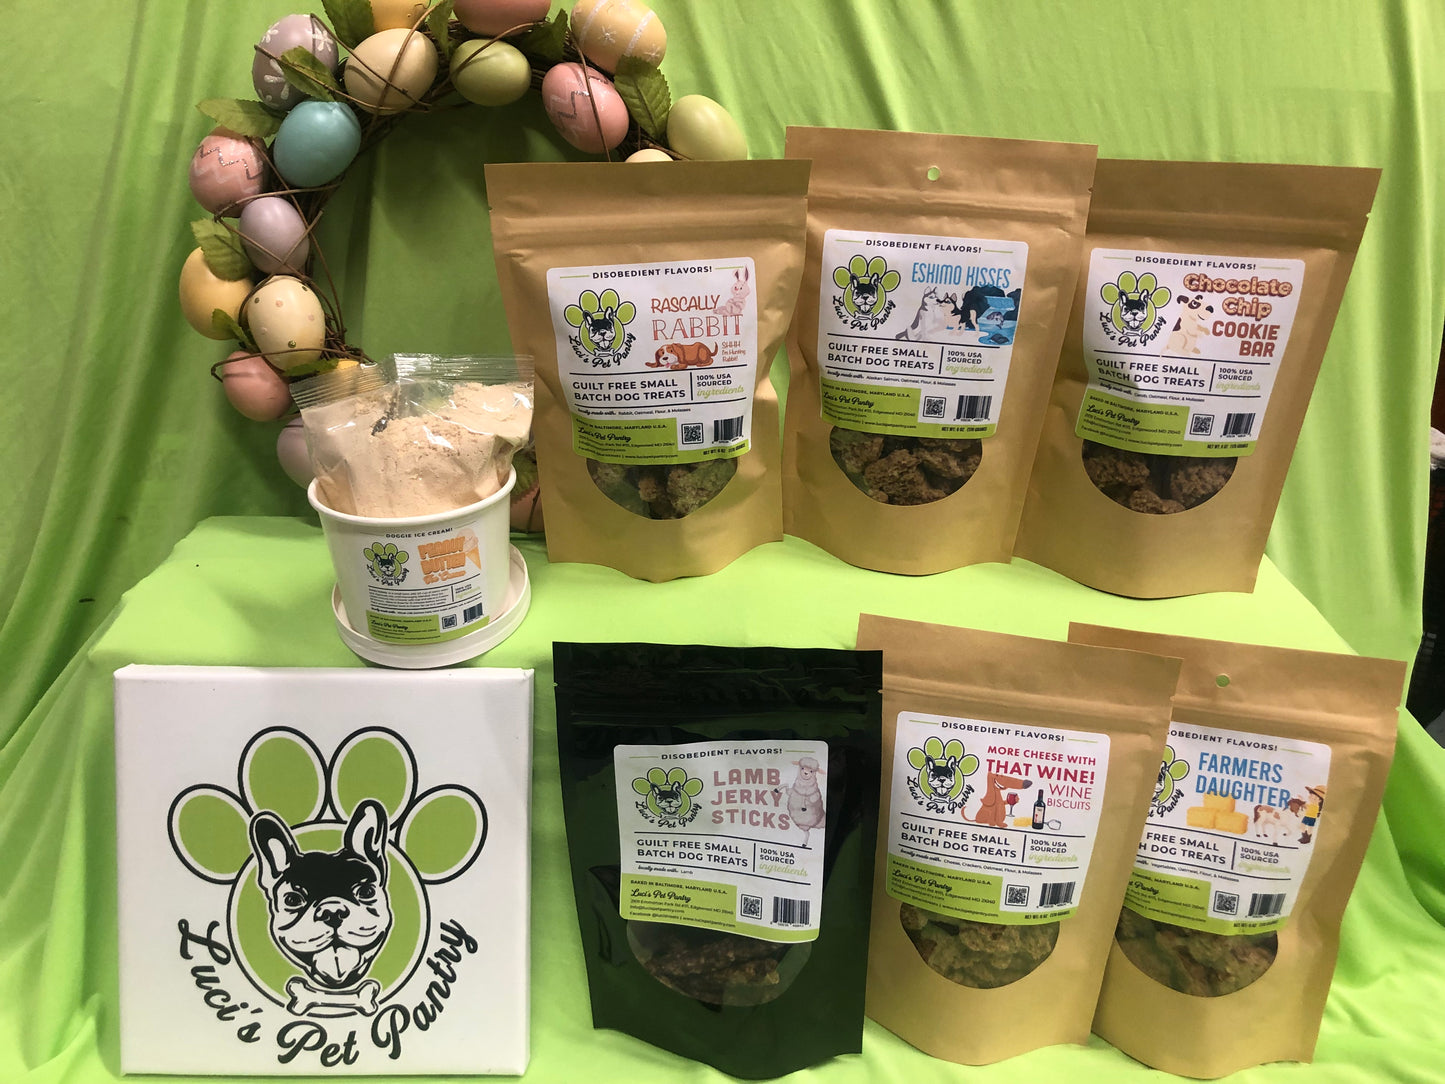 "Happy Easter" Dog & Puppy Gift Box!  Now Available Year Round!